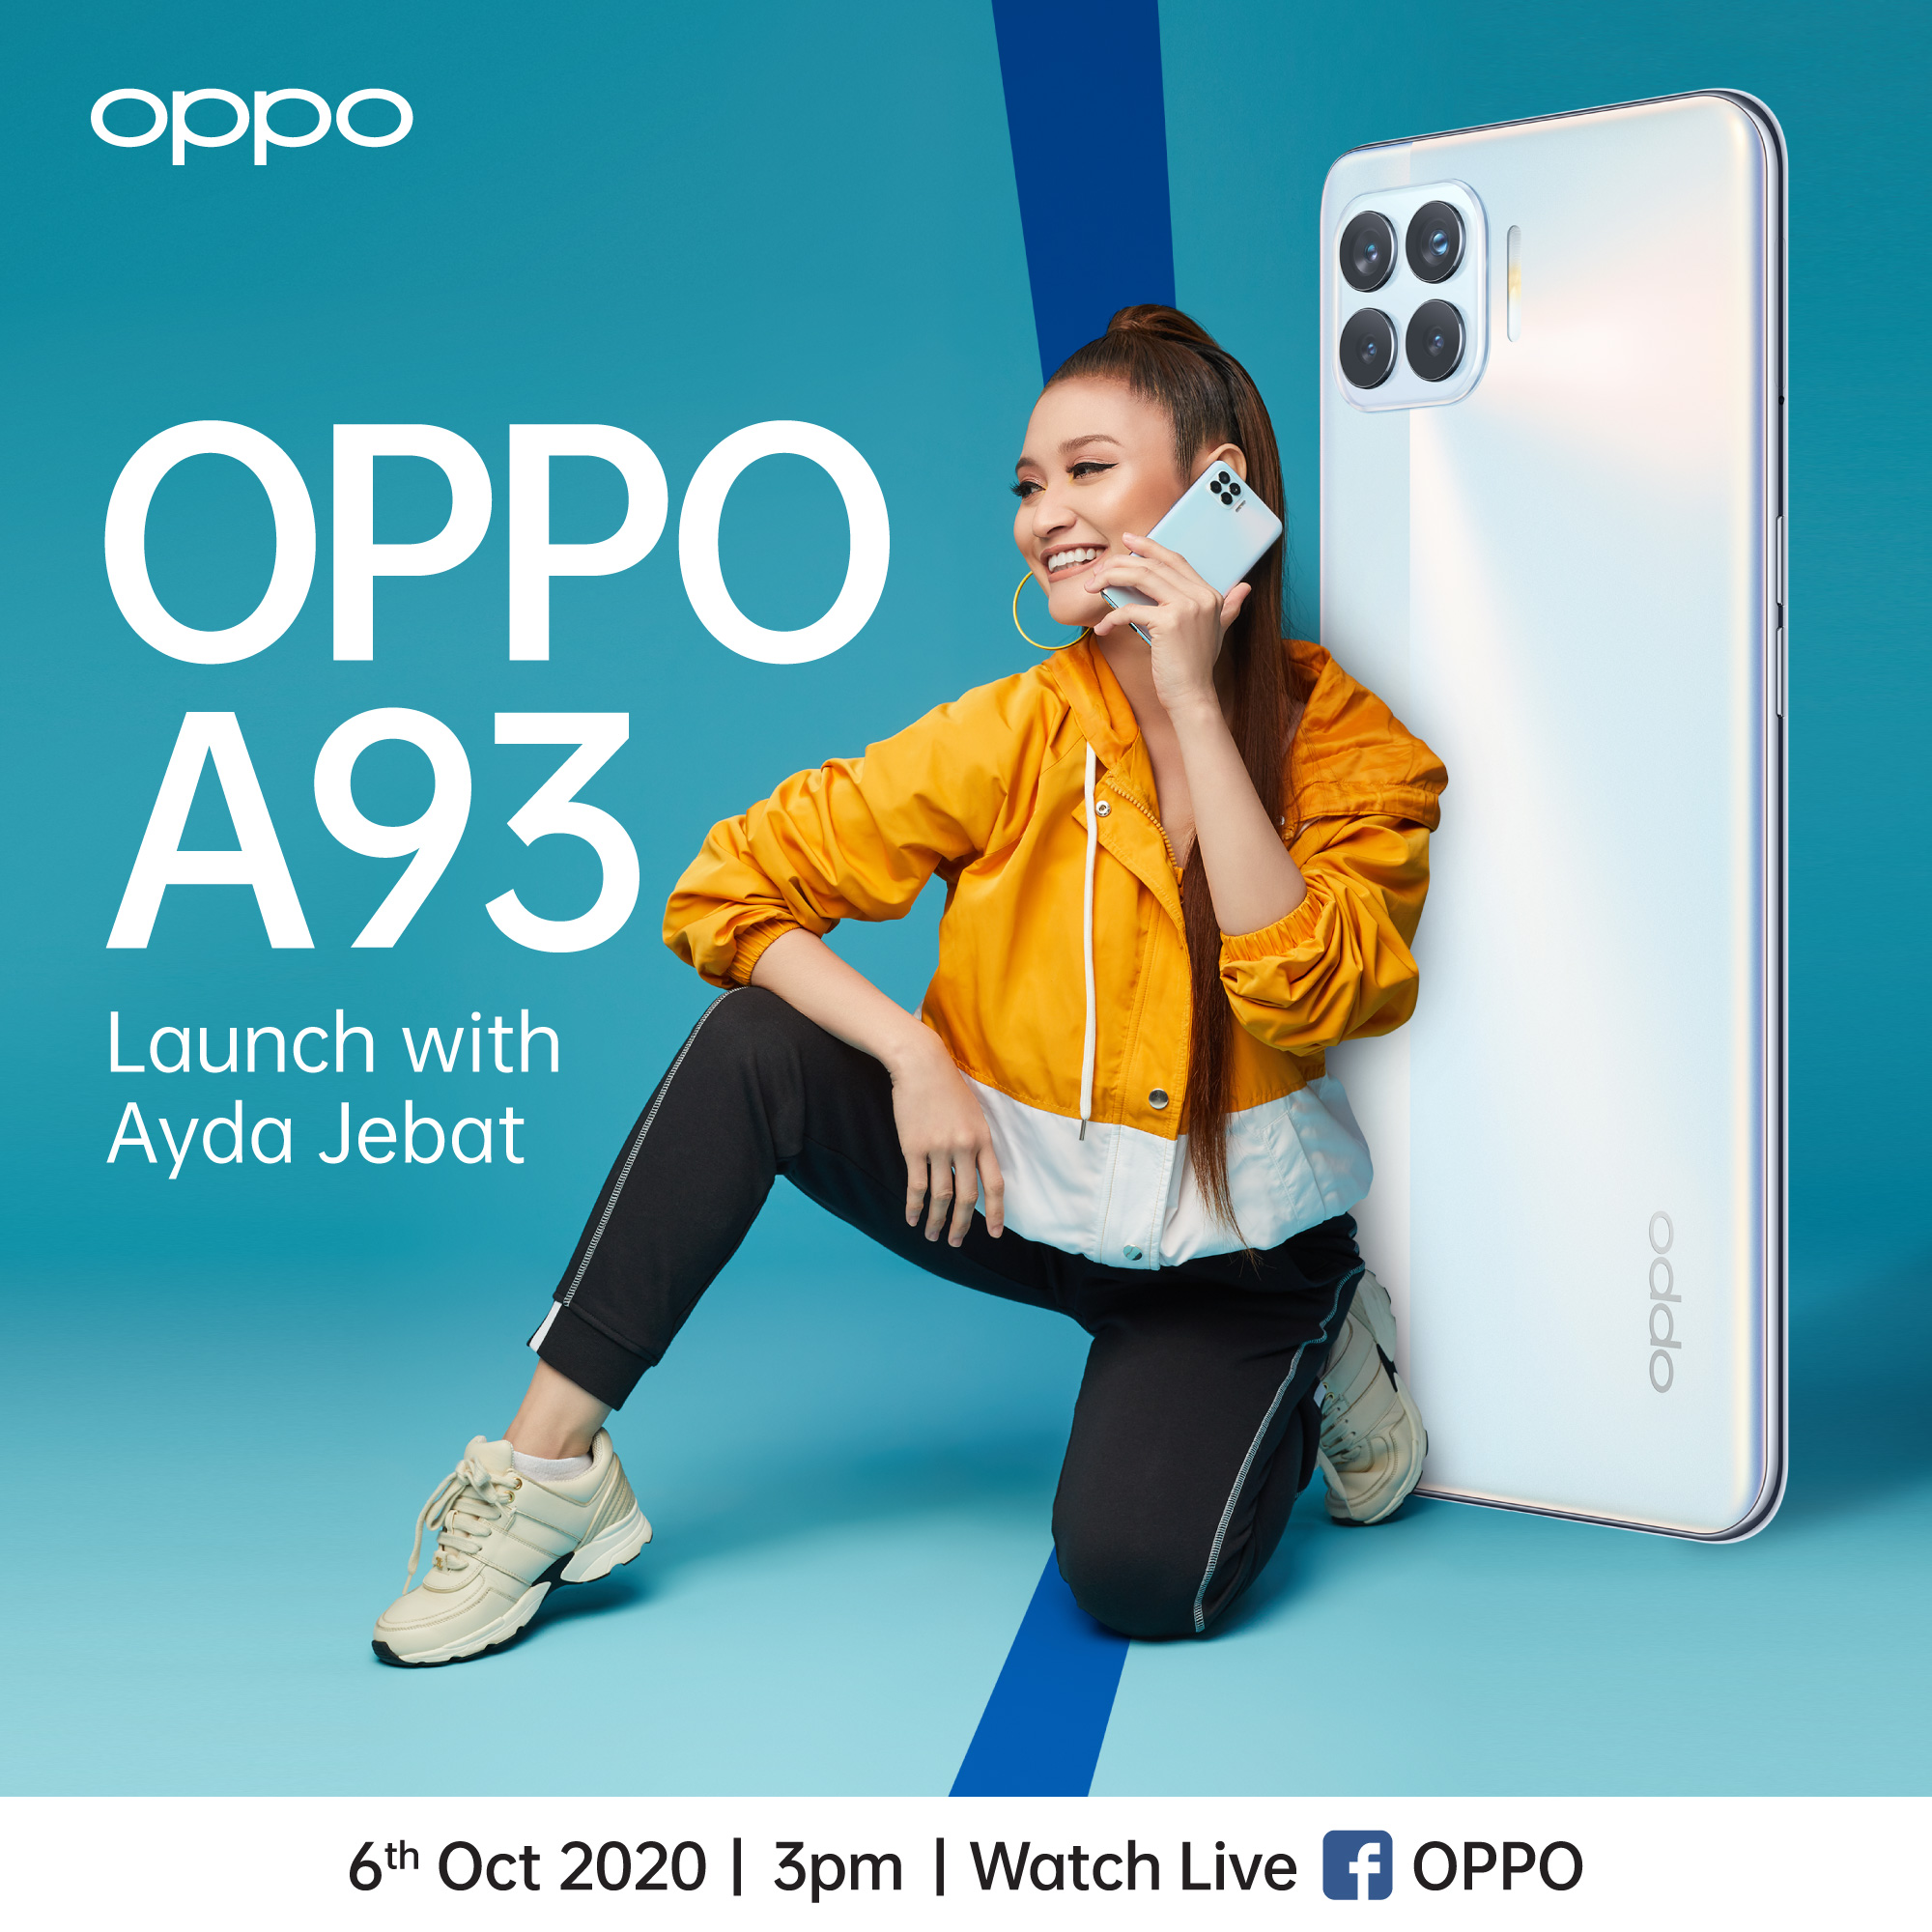 OPPO A93 Launch with Ayda Jebat